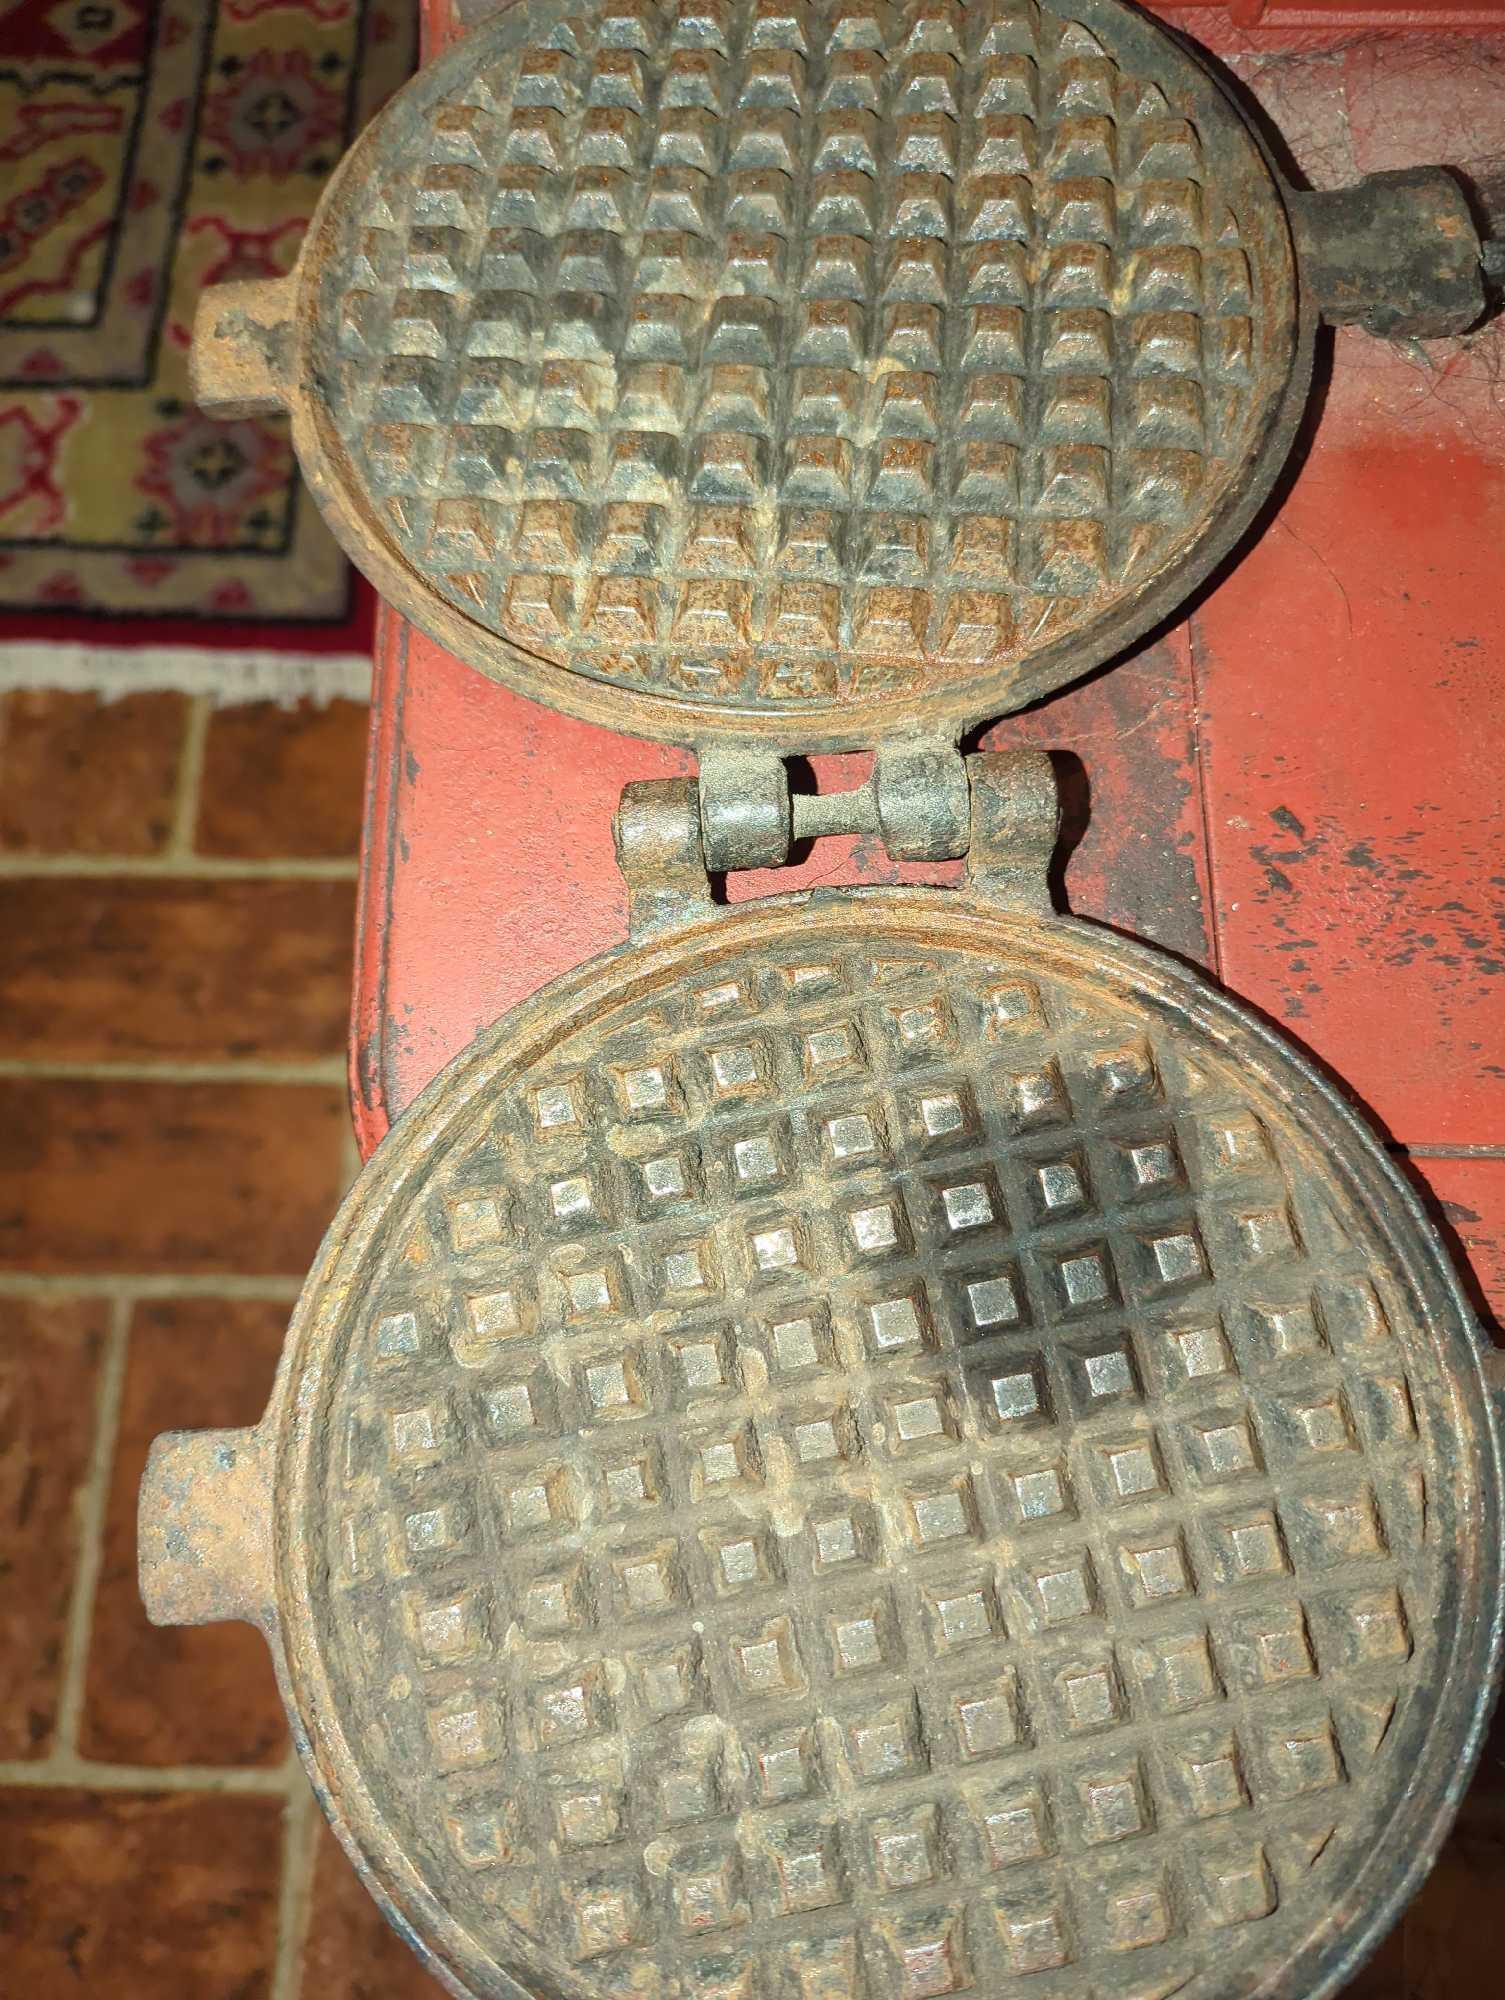 (KIT) EARLY STYLE CAST IRON WAFFLE MAKER, MEASURE APPROXIMATELY 7 IN X 22 IN, WHAT YOU SEE IN PHOTOS